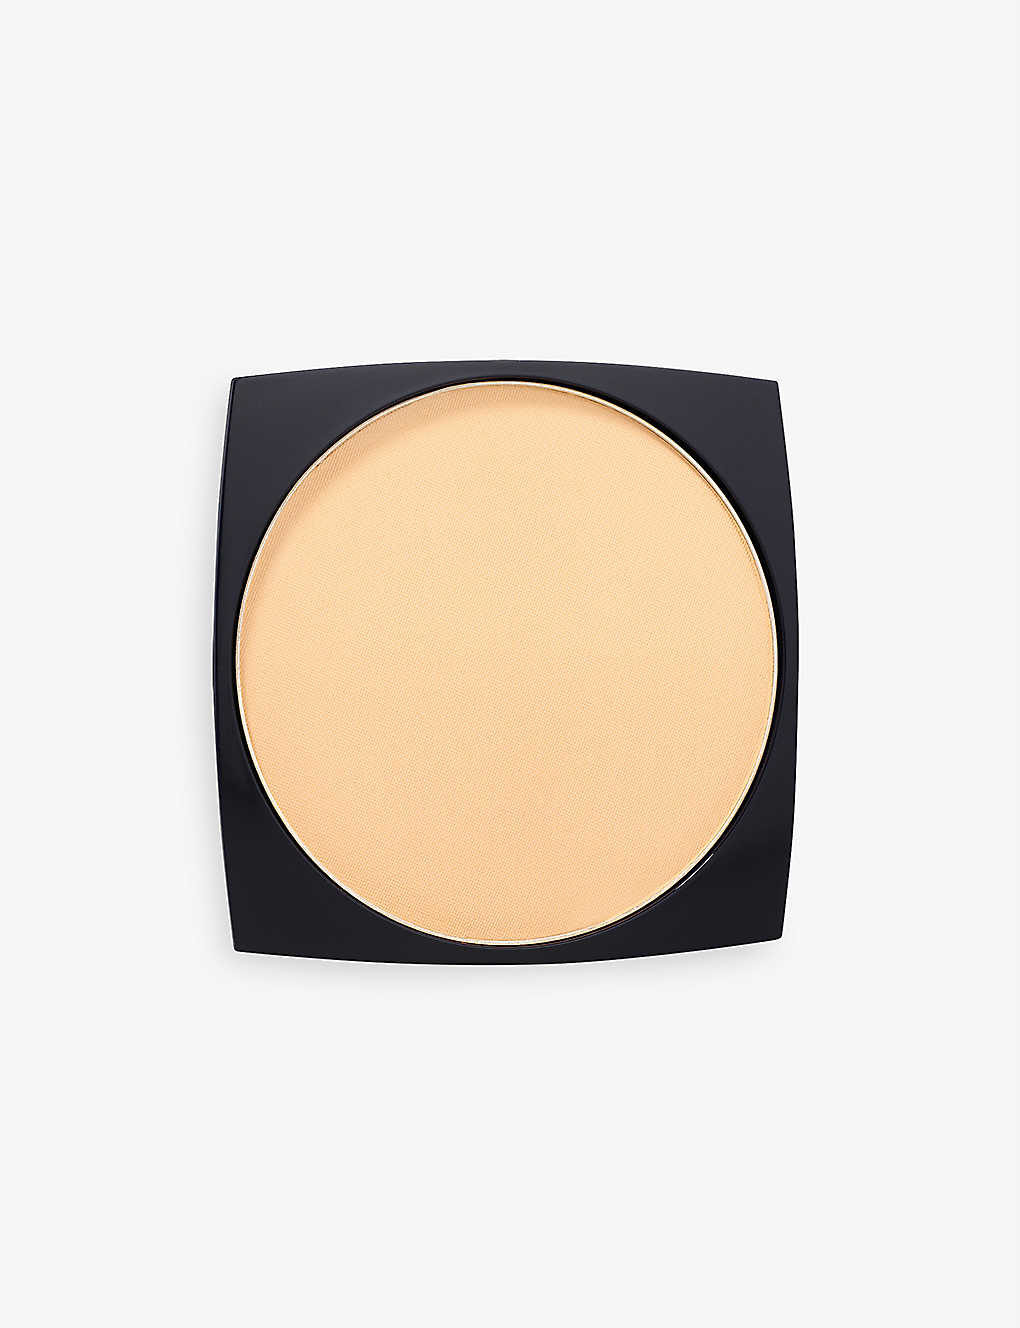 Estée Lauder Double Wear Stay-in-place Matte Spf10 Powder Foundation Refill 12g In 2w1.5 Natural Suede